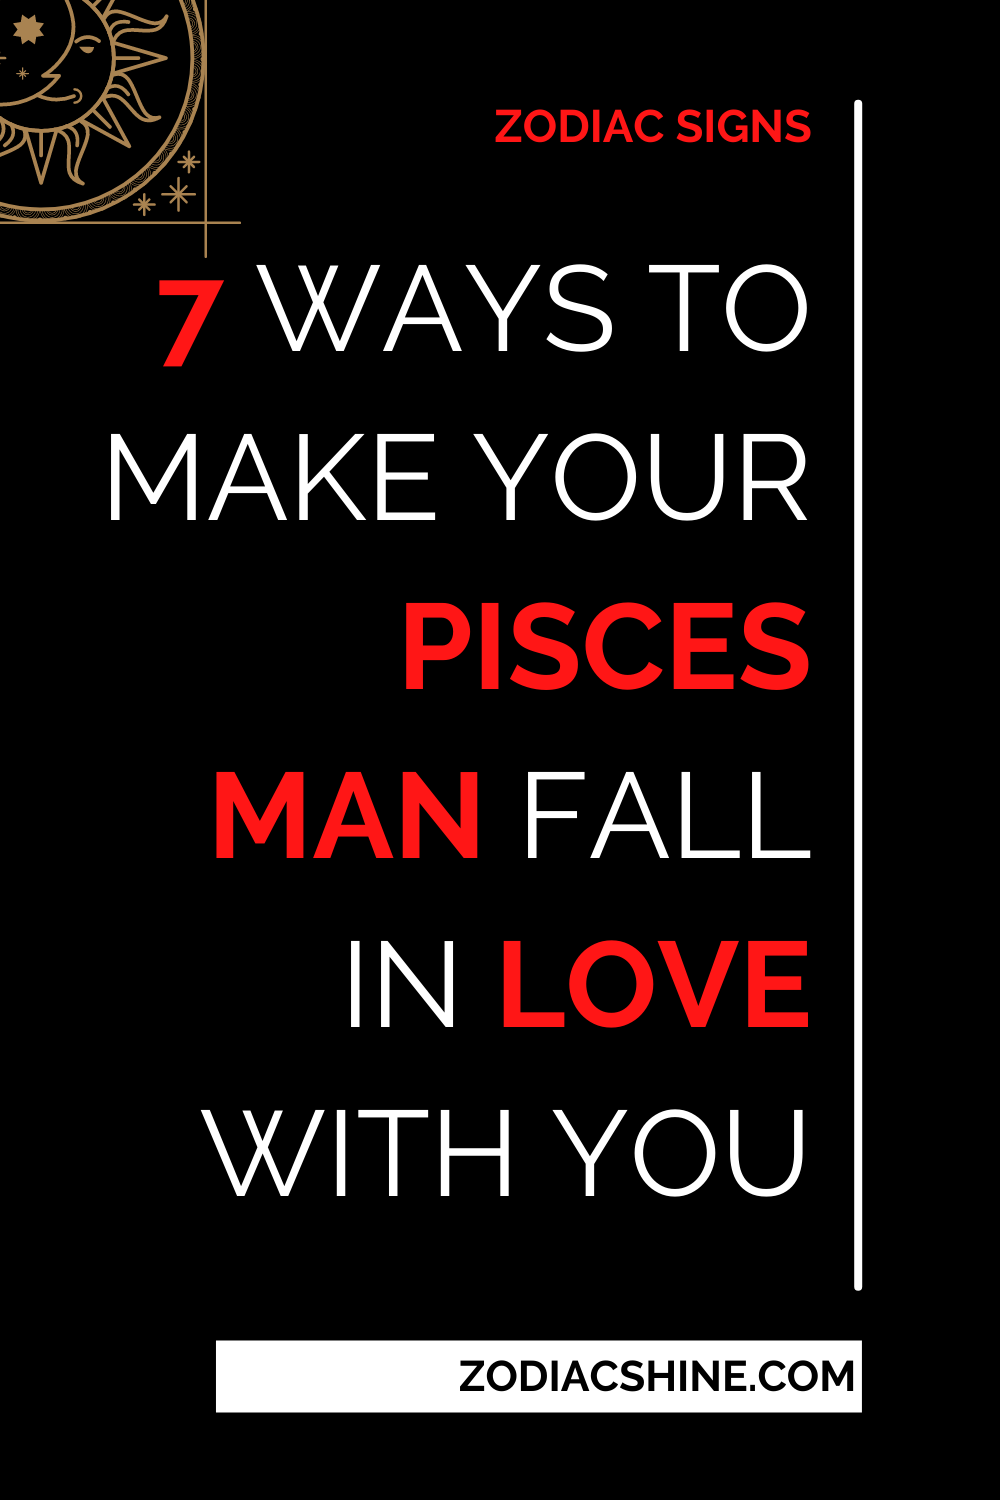 7 Ways To Make Your Pisces Man Fall In Love With You